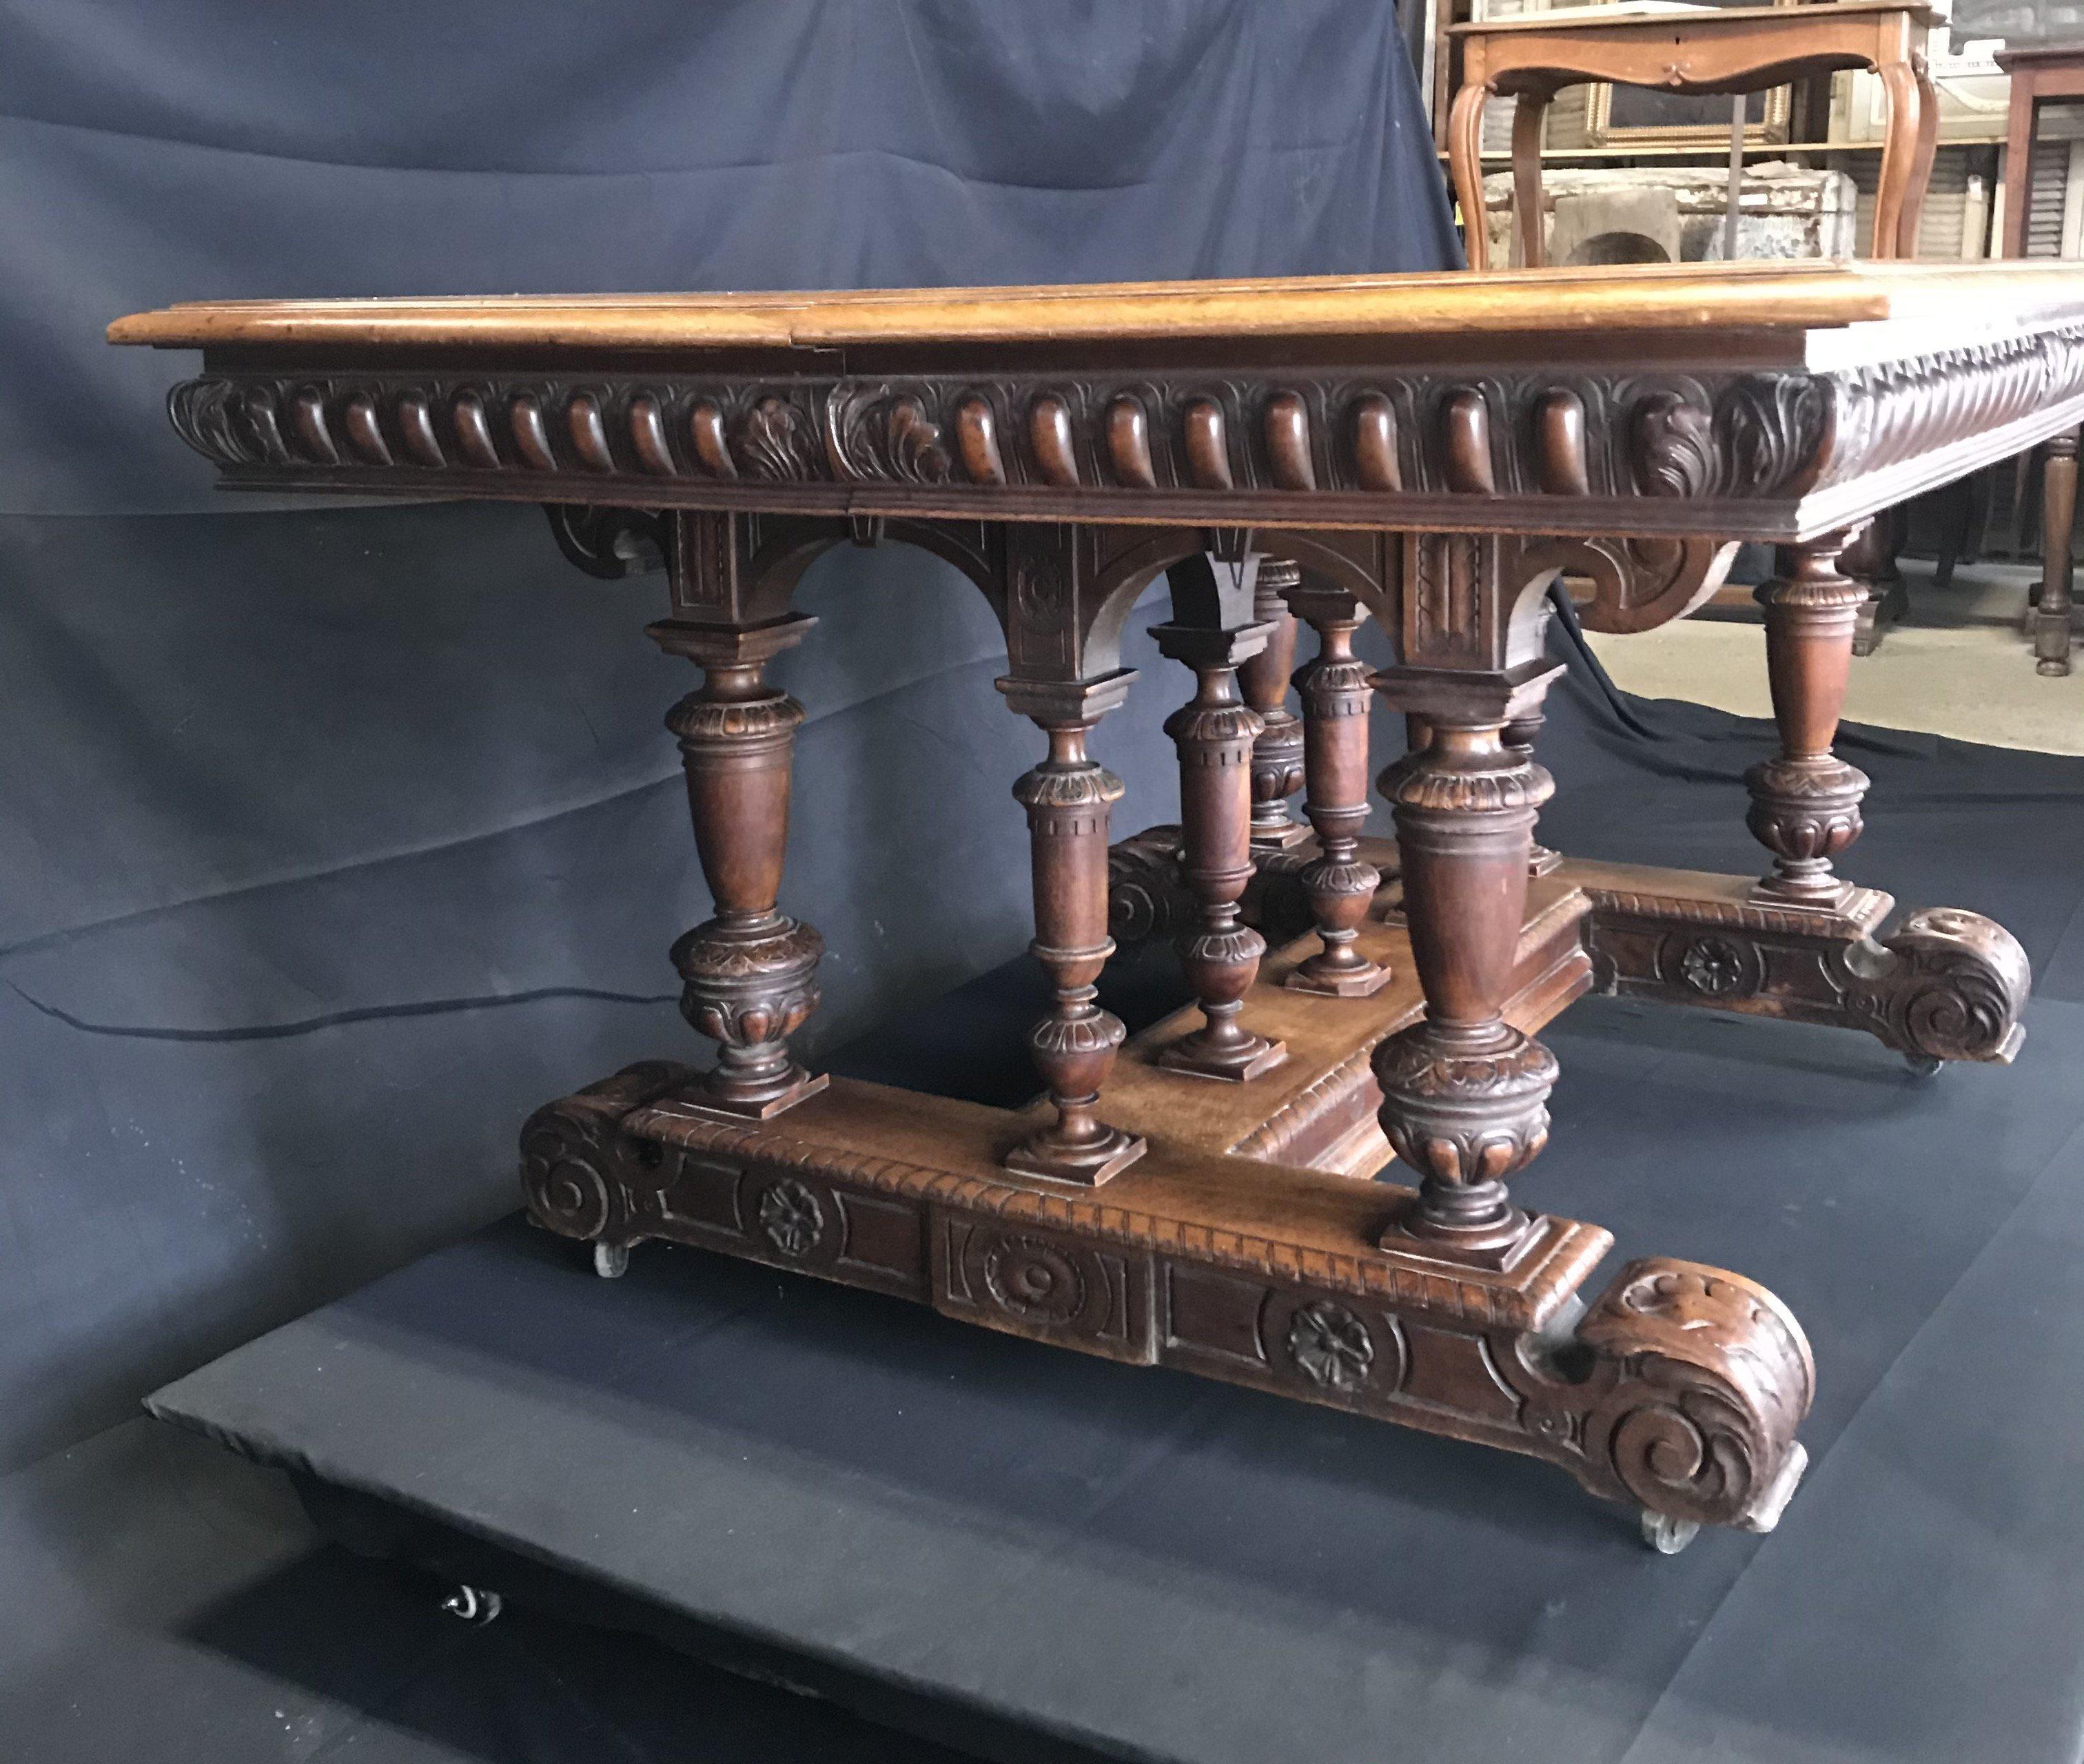 Beautiful columnal carving on this classic French 19th century walnut dining table that is extendable to up to 12 feet (leaves not included). Easily moveable on its casters, this early table is sturdy and in wonderful shape. Can serve as a dining